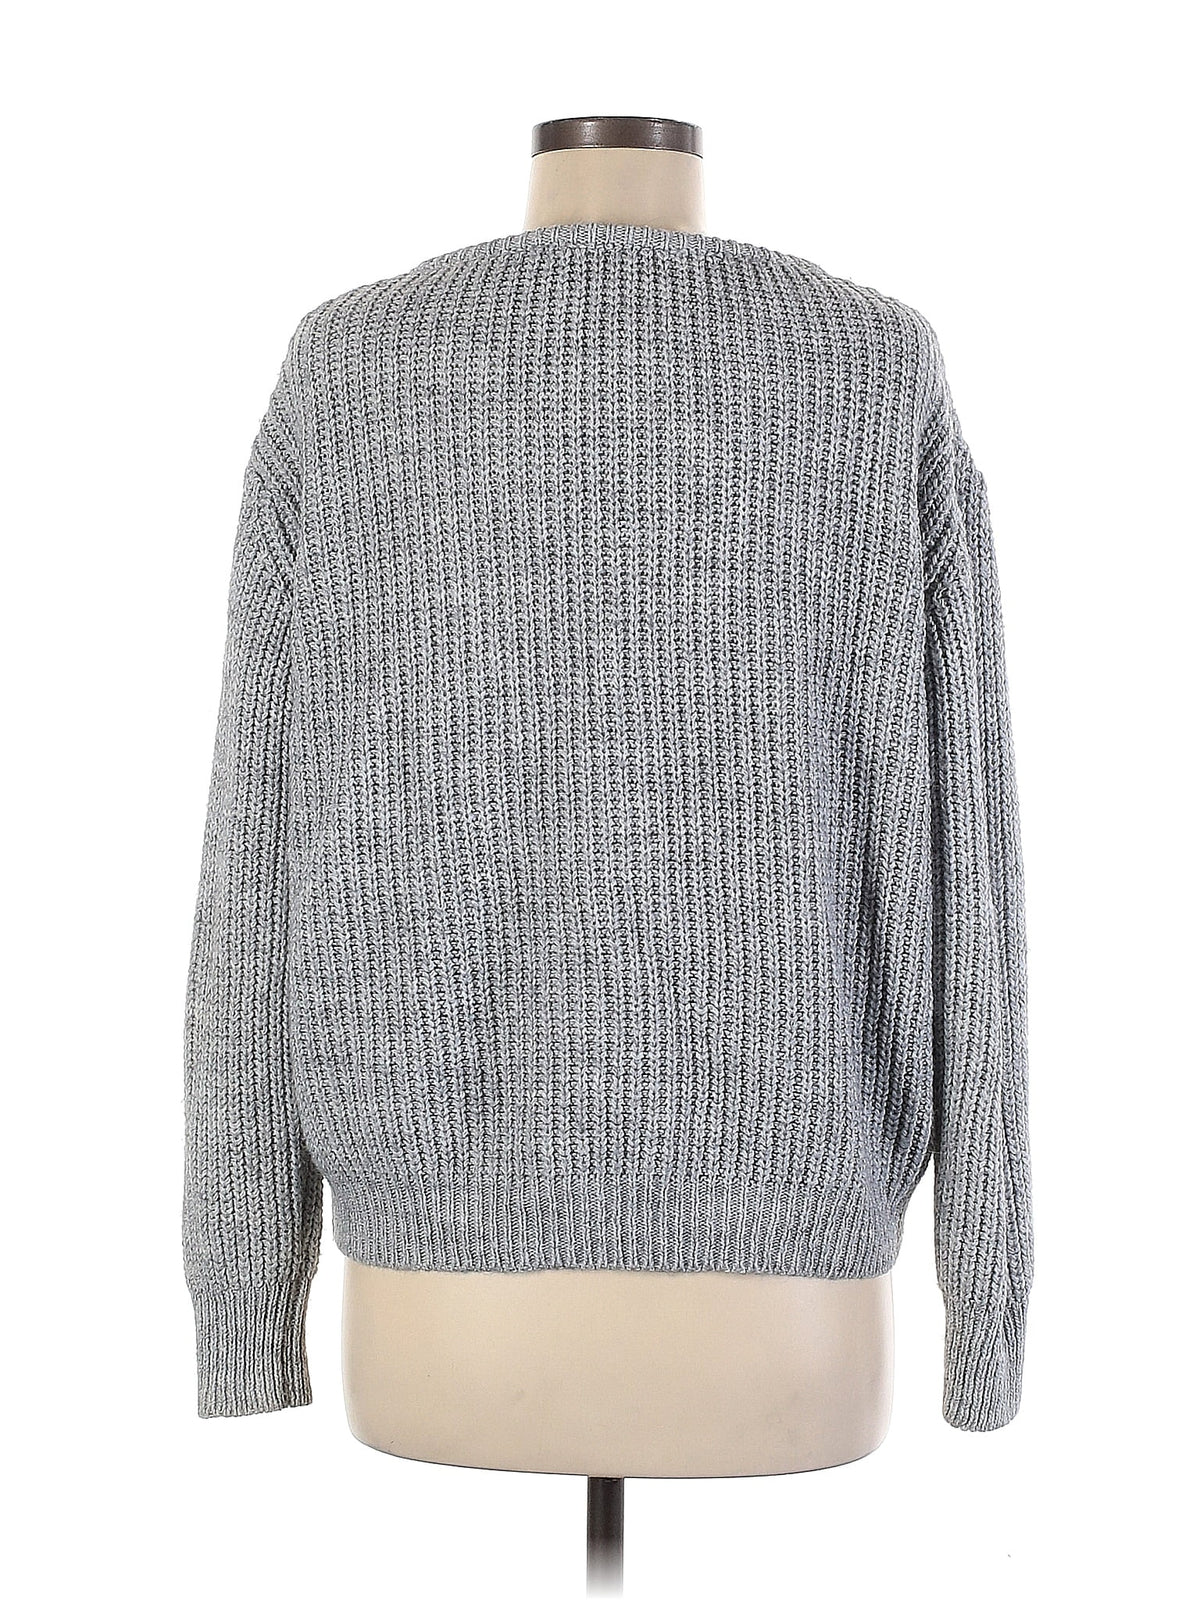 Wool Pullover Sweater size - One Size